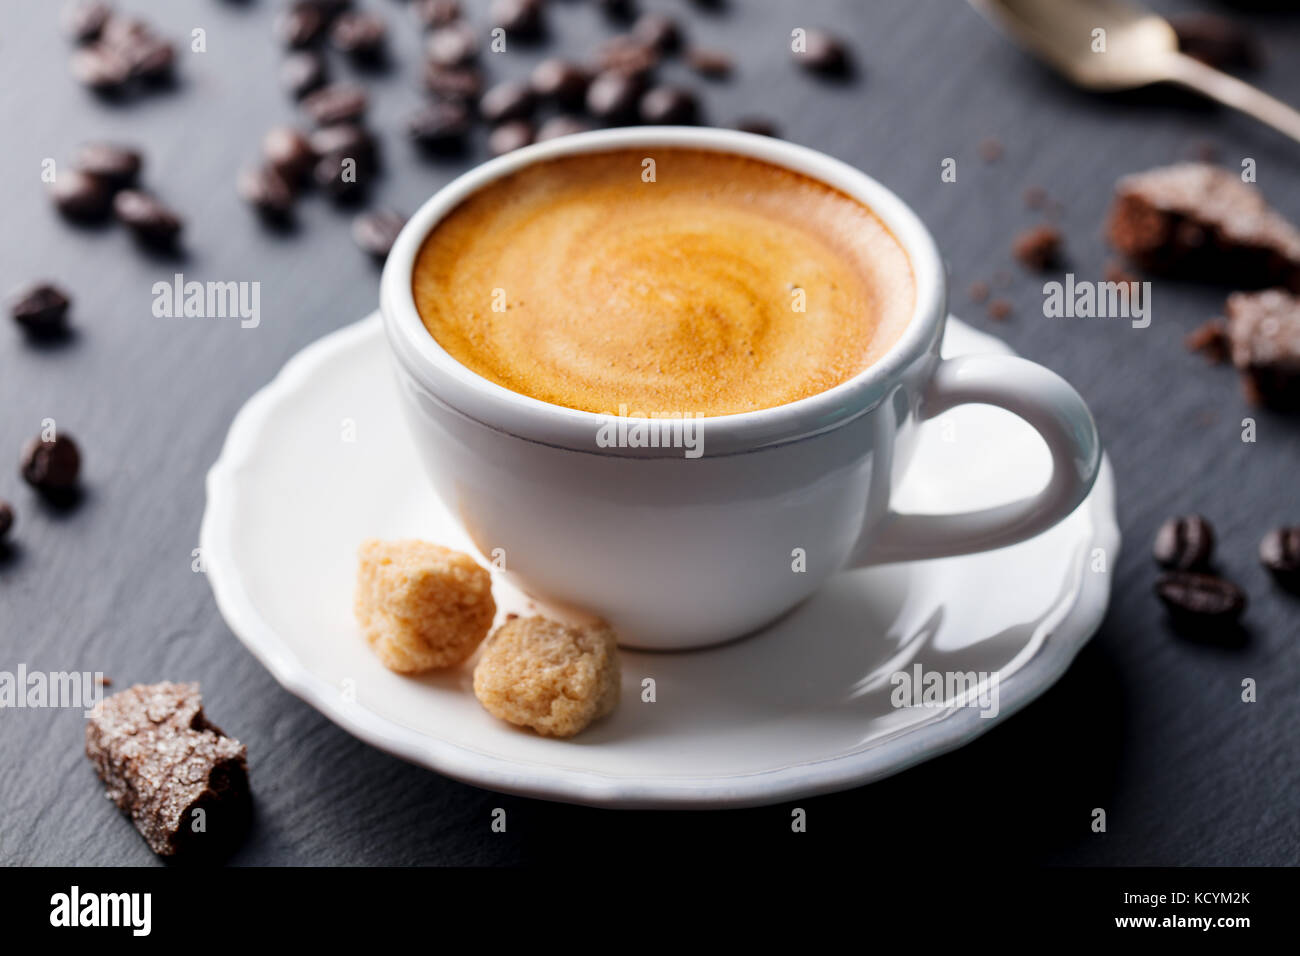 Coffee espresso in white cup on black slate background. Stock Photo